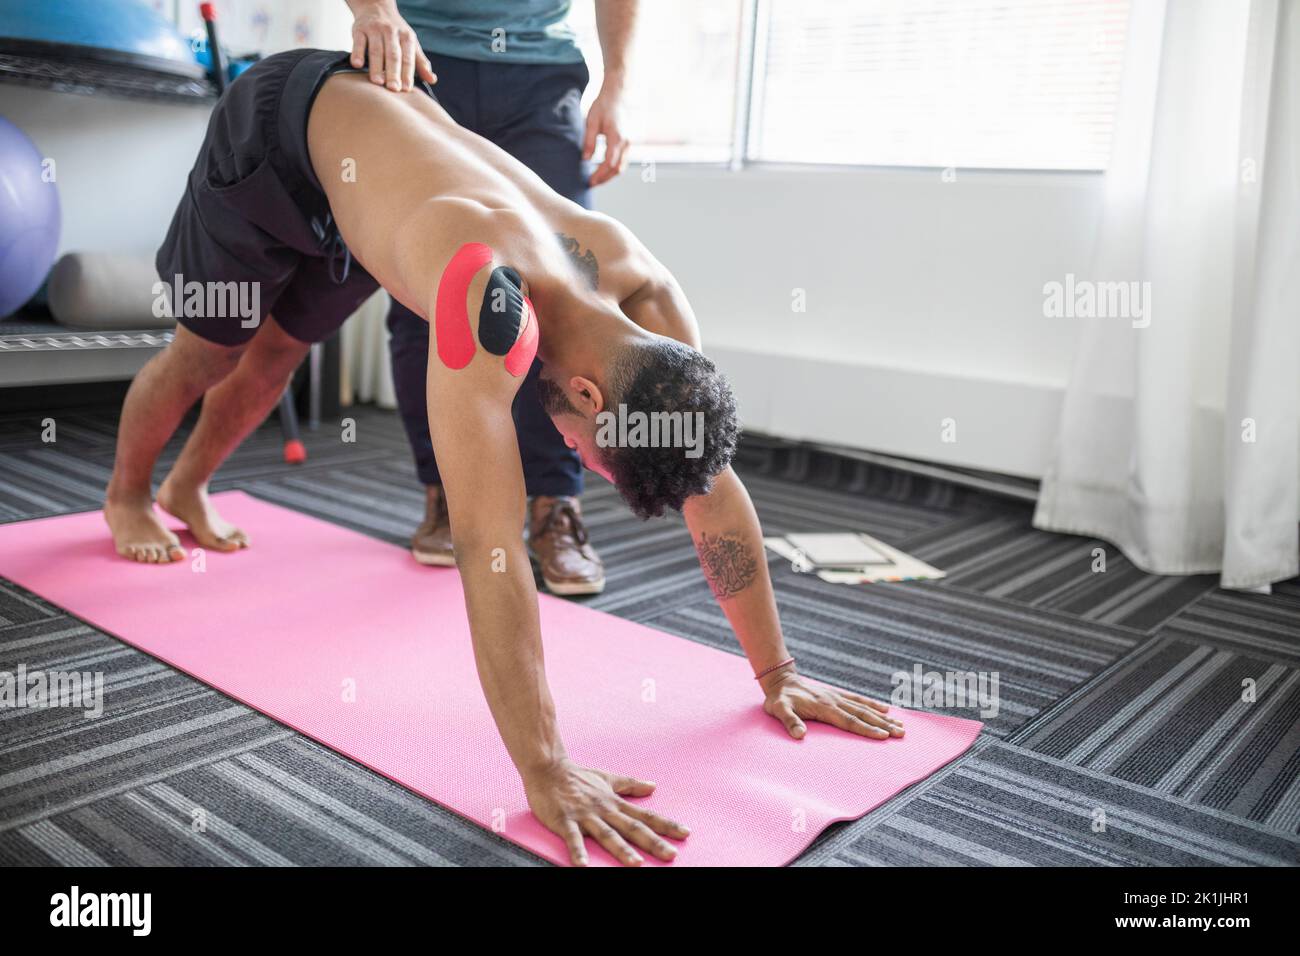 Physiotherapist helping male client in yoga position Stock Photo